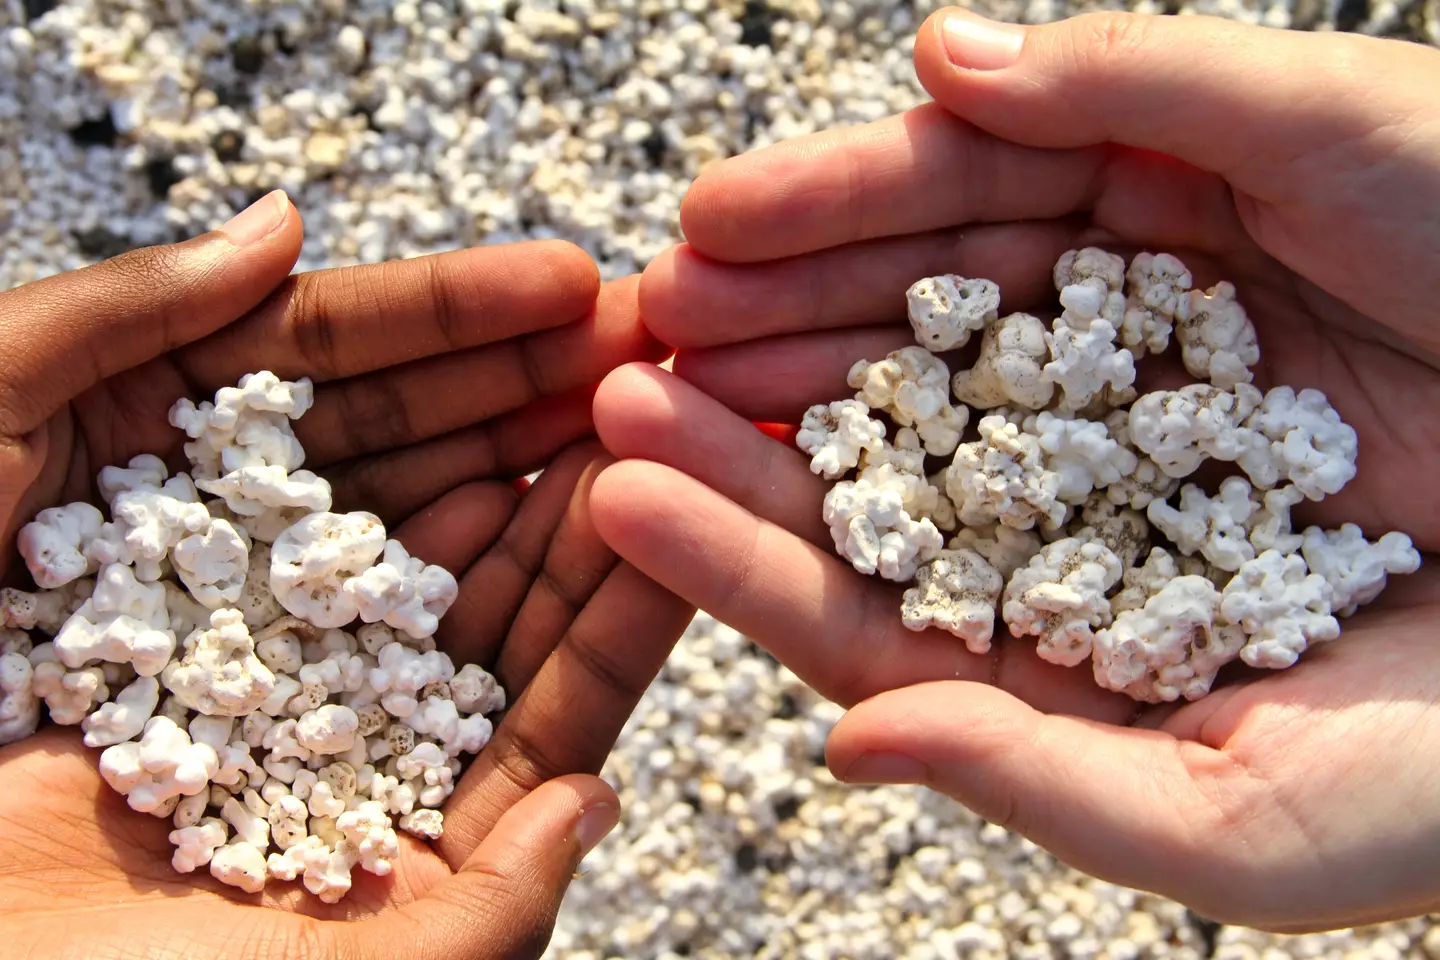 Popcorn Beach is regularly ravaged for souvenirs by tourists.